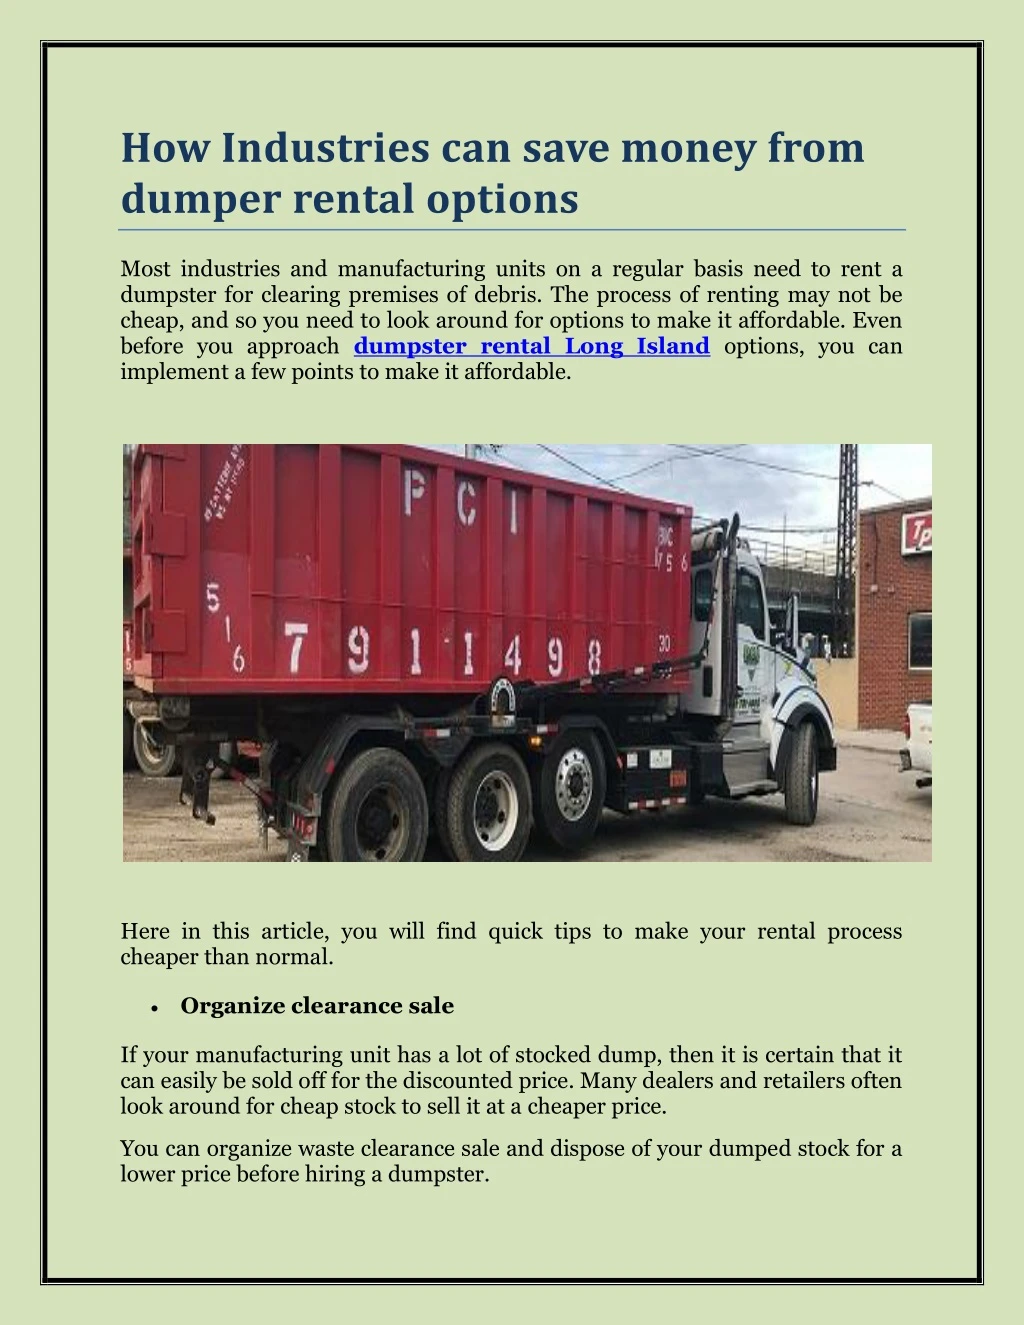 how industries can save money from dumper rental